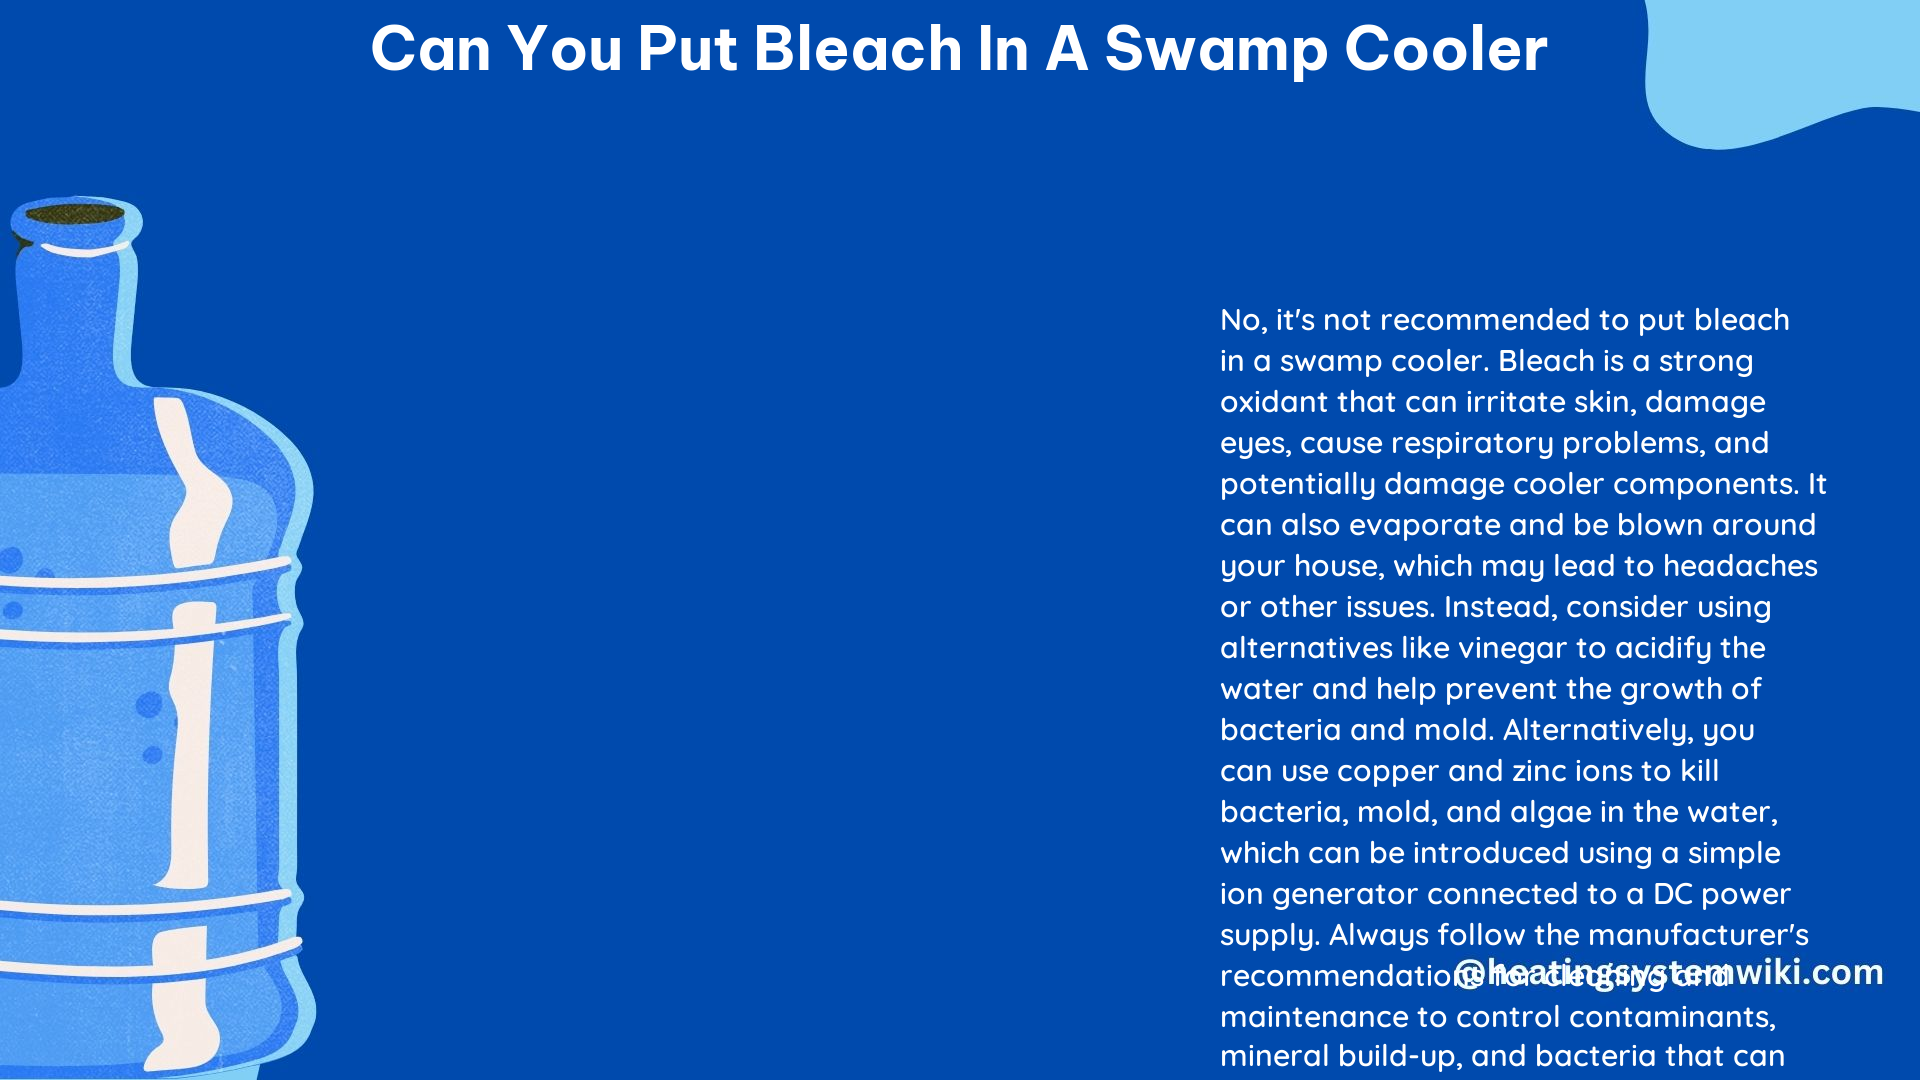 Can You Put Bleach in a Swamp Cooler